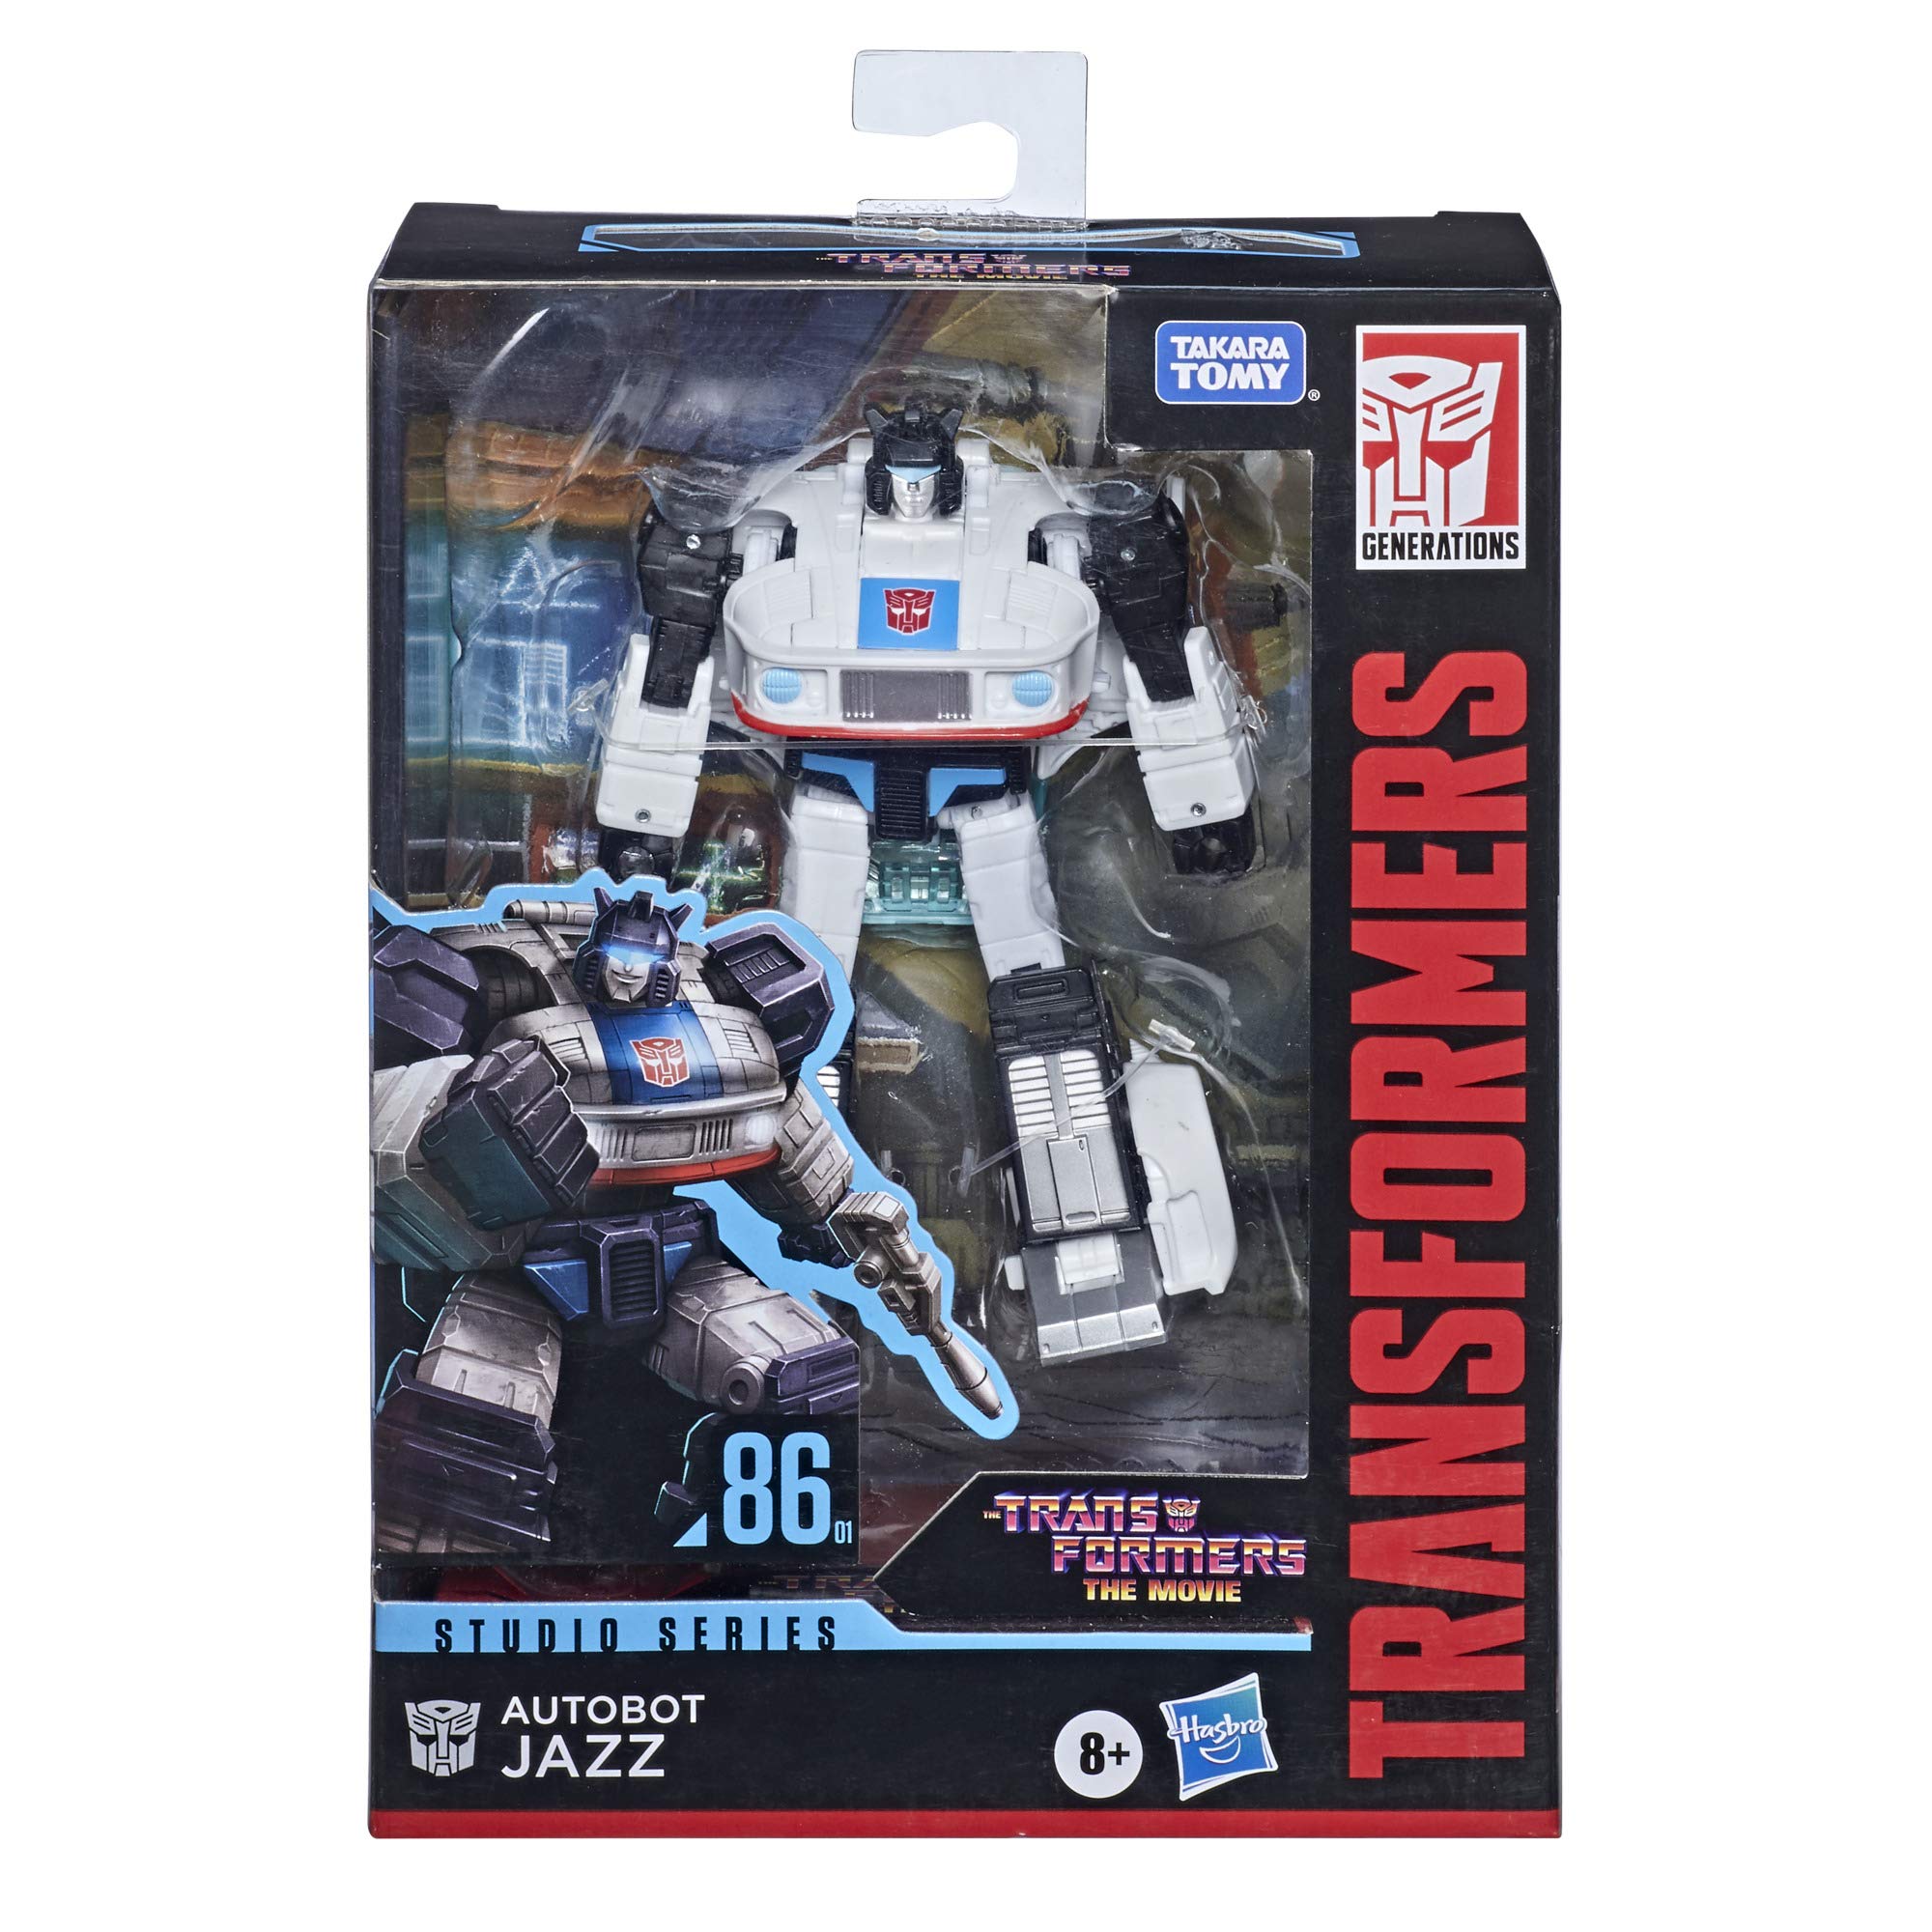 Mua Transformers Toys Studio Series 86-01 Deluxe Class The The Movie 1986  Autobot Jazz Action Figure - Ages 8 and Up,  trên Amazon Mỹ chính  hãng 2023 | Giaonhan247